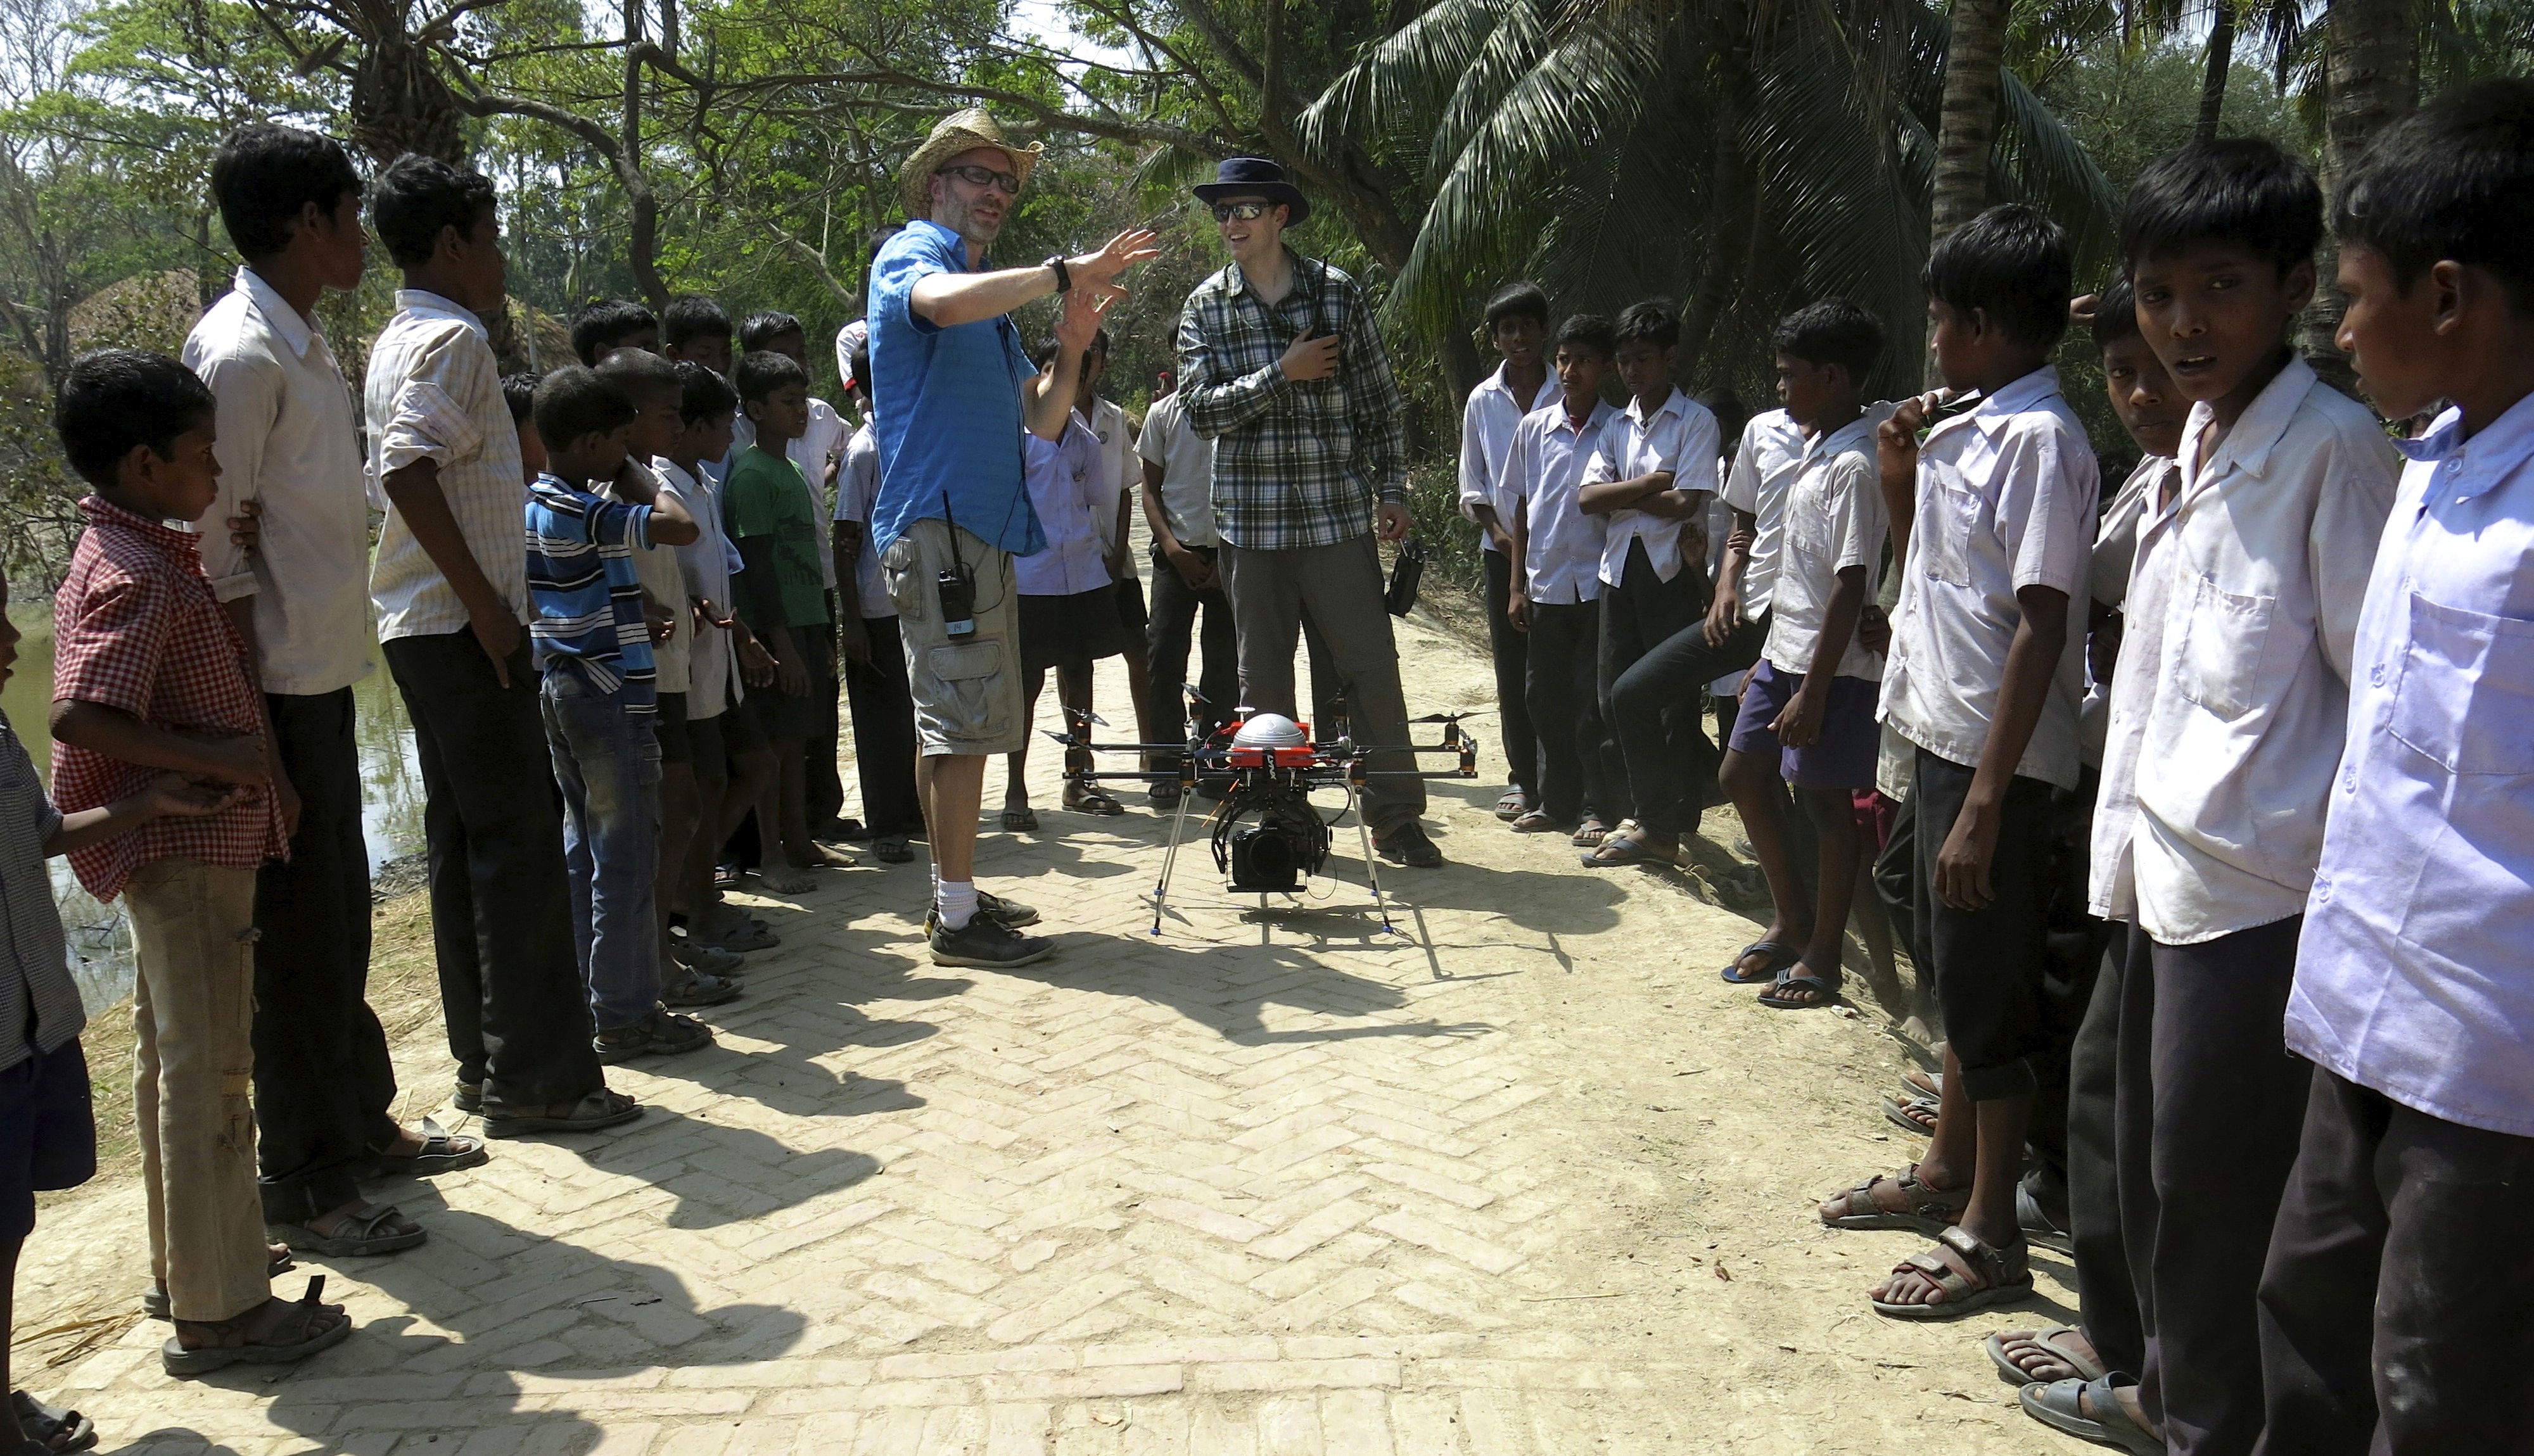 Setting up an octocopter shot with Dionys Frei from Dedicam. Bali Island School, India.